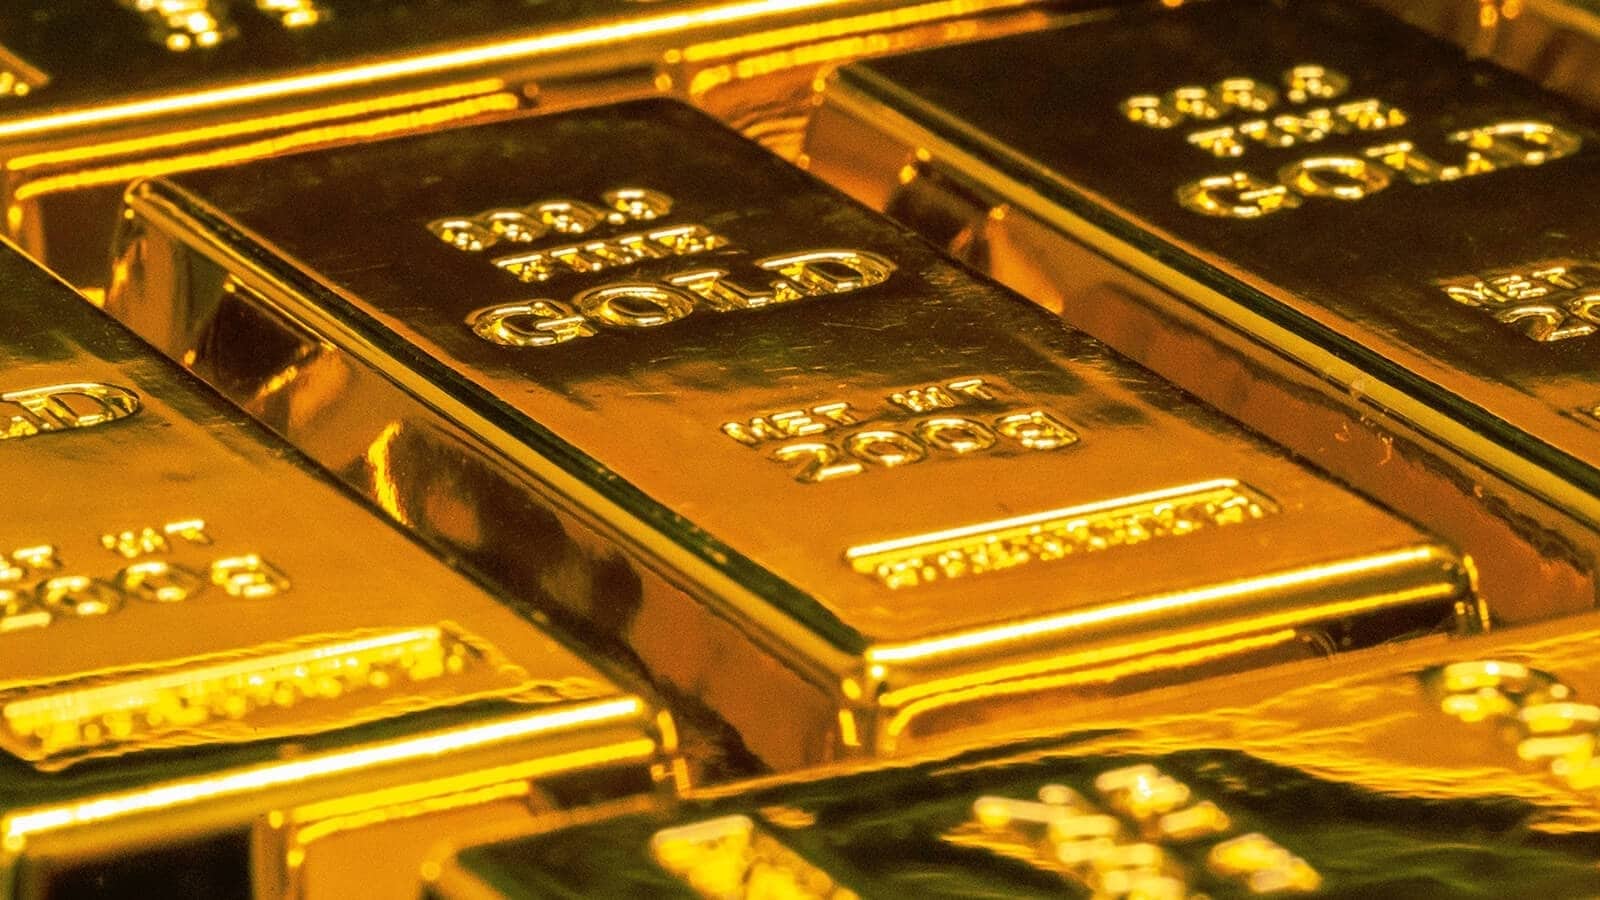 Gold, silver prices go up, analysts decode reasons - Hindustan Times